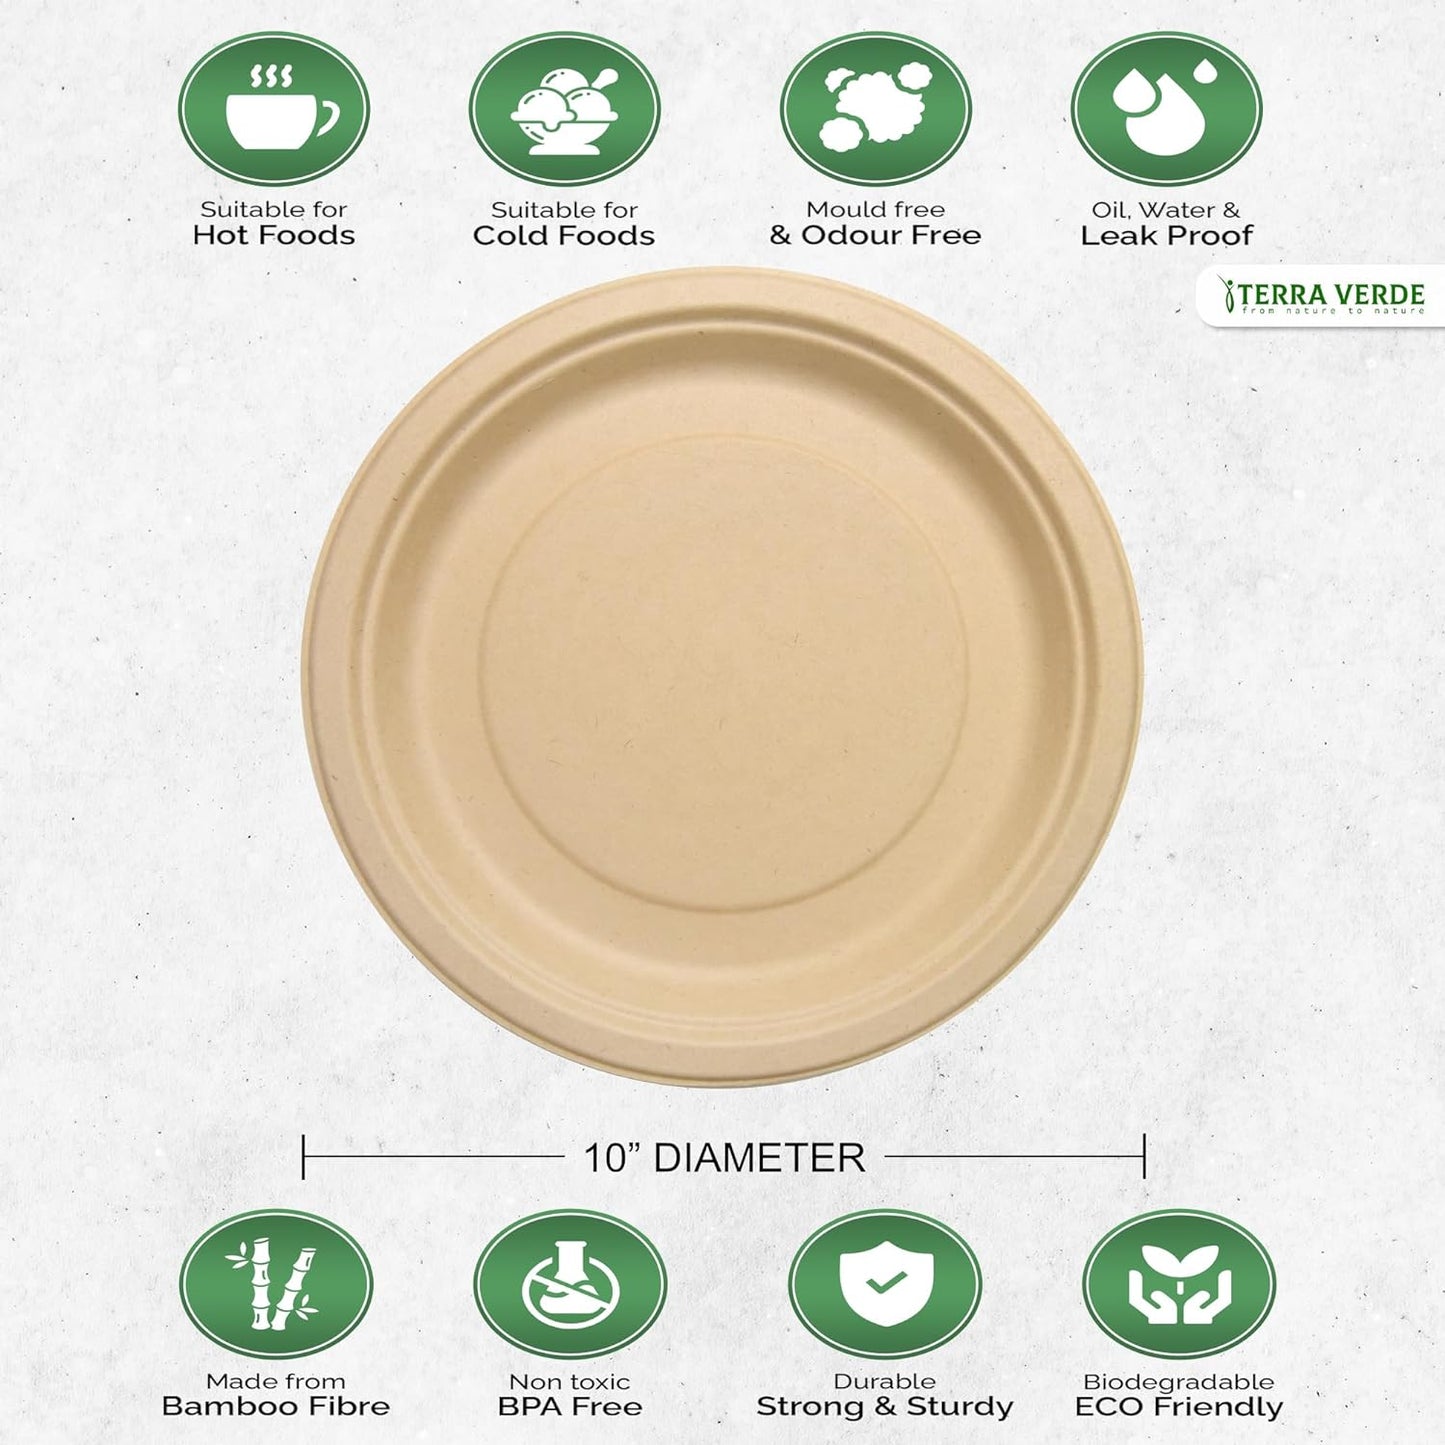 Disposable Bamboo Fibre Paper Plates l 10 inch (25cm) Round 50 Pack l Large Unbleached Natural Brown l 100% Compostable Eco Friendly Extra Strong Plate for Parties, Picnics, BBQ, Weddings